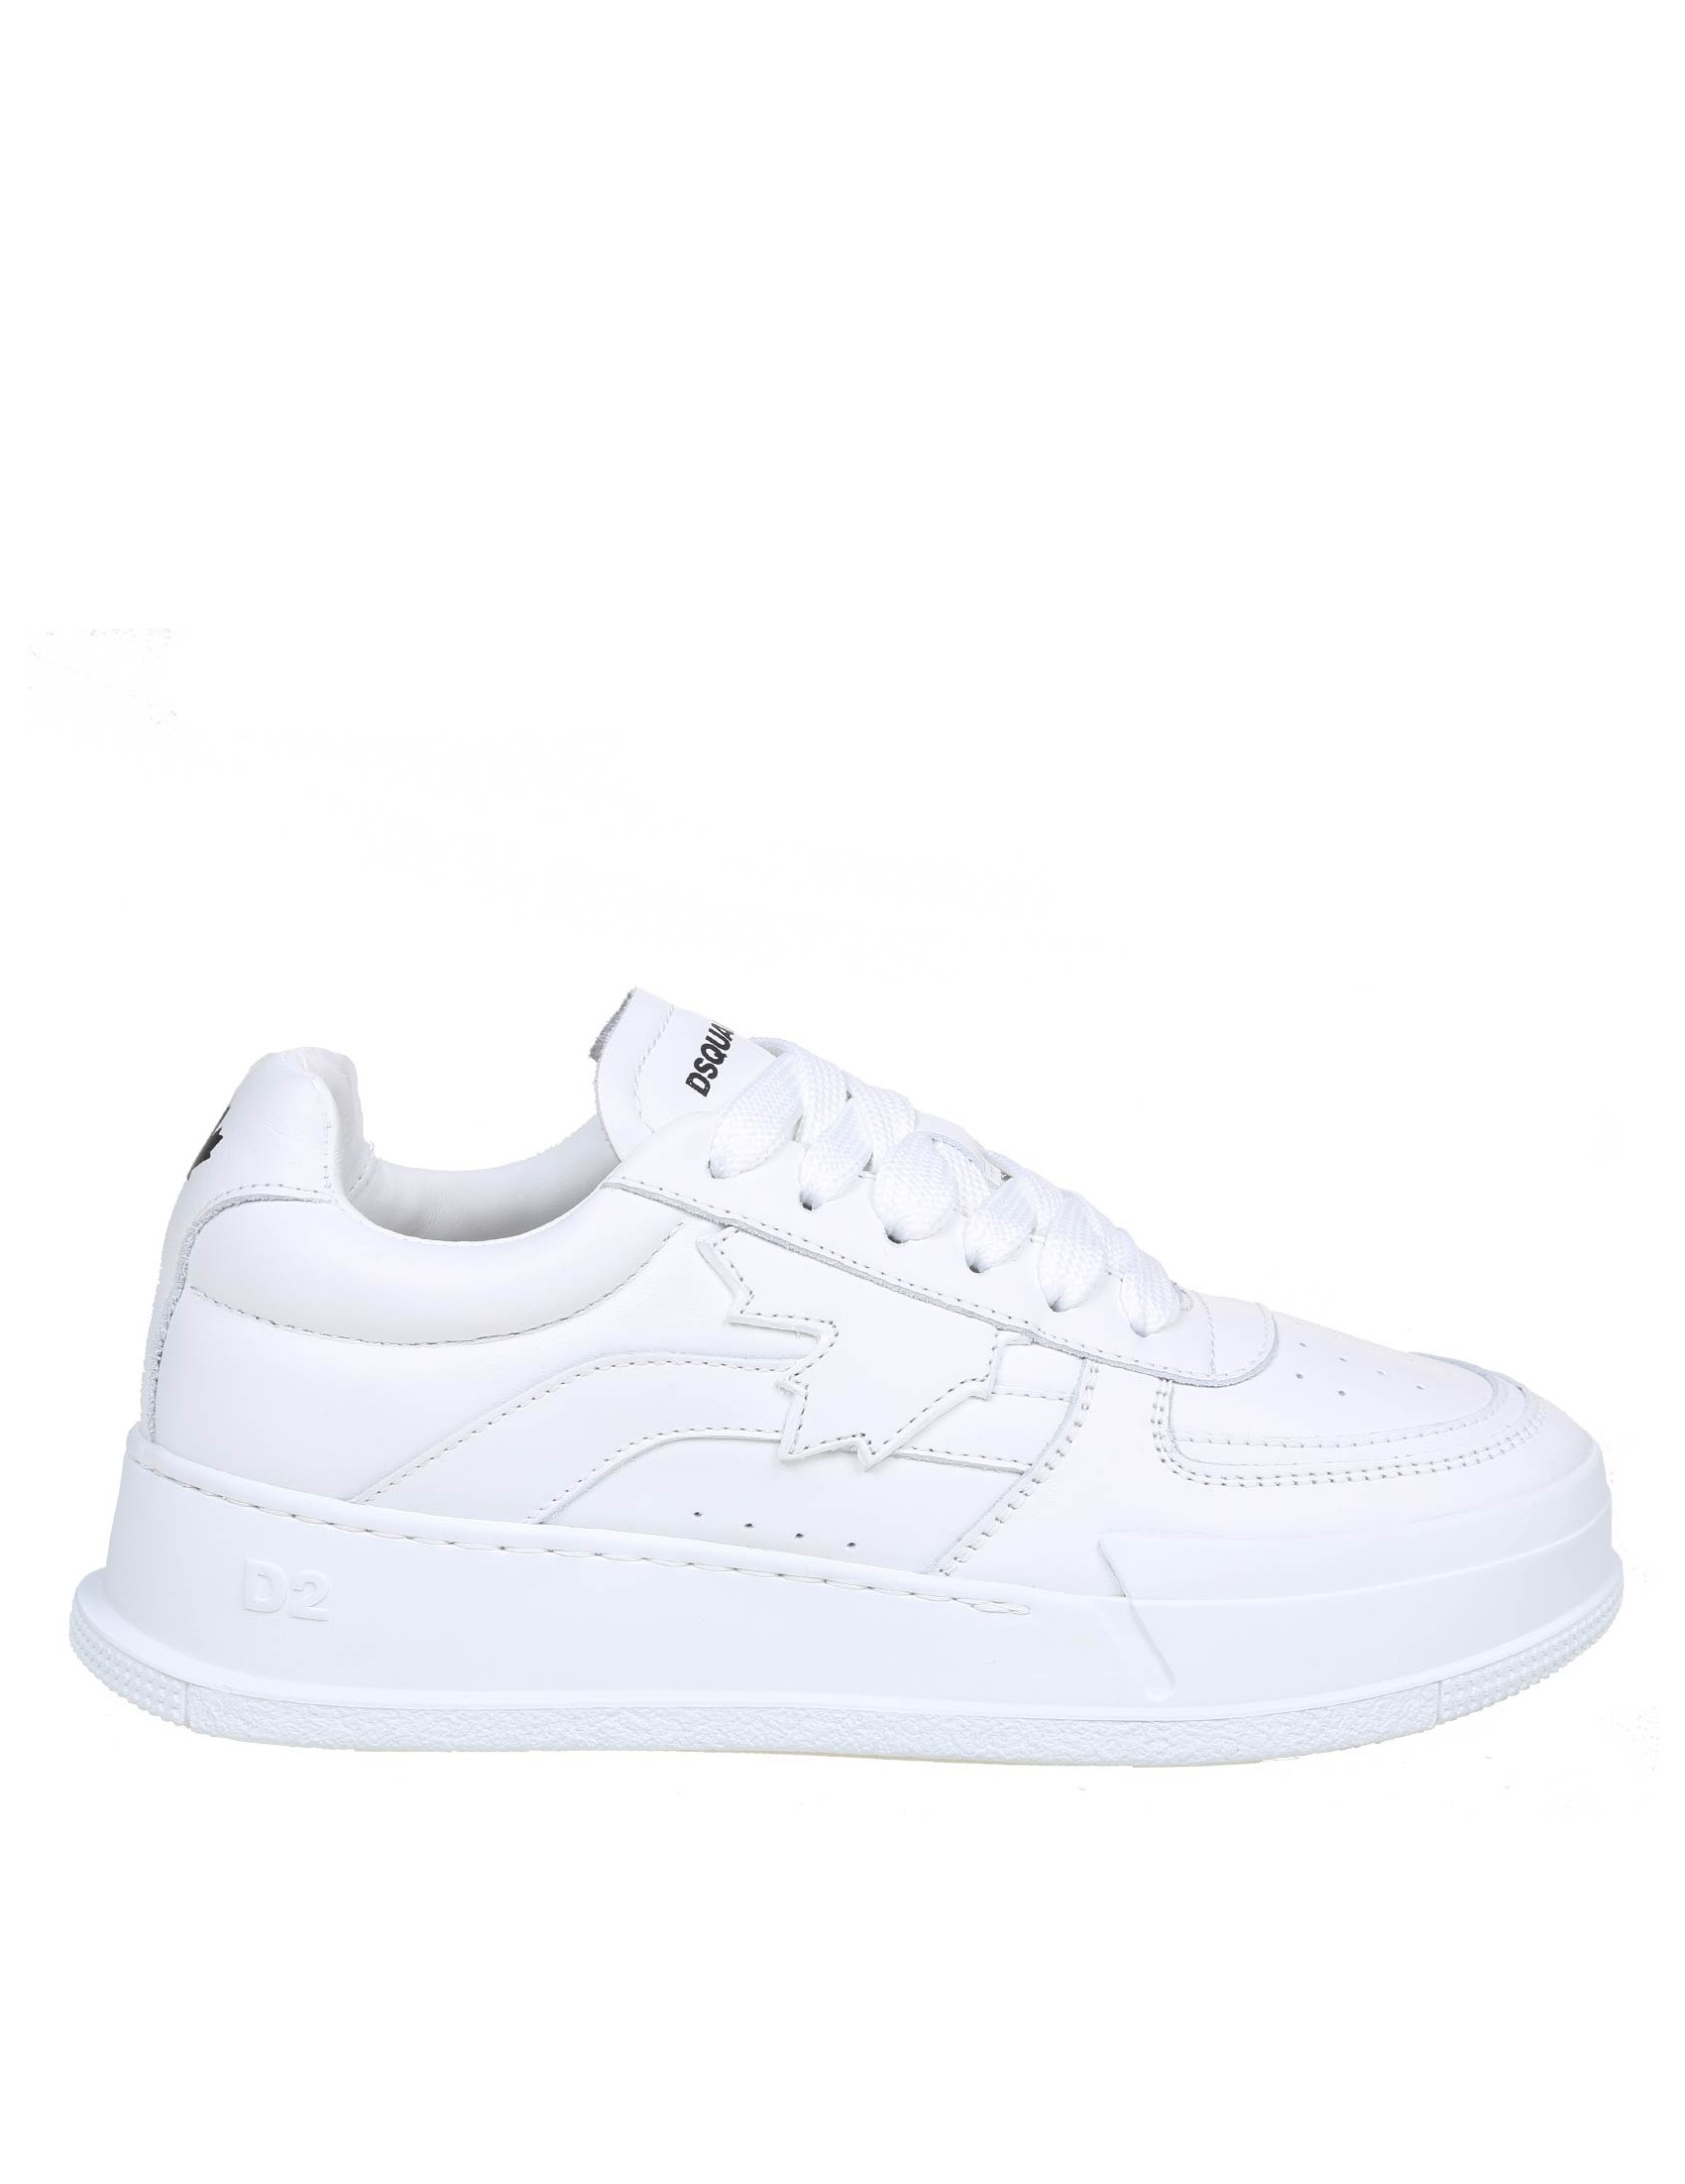 DSQUARED2 SNEAKERS IN WHITE LEATHER